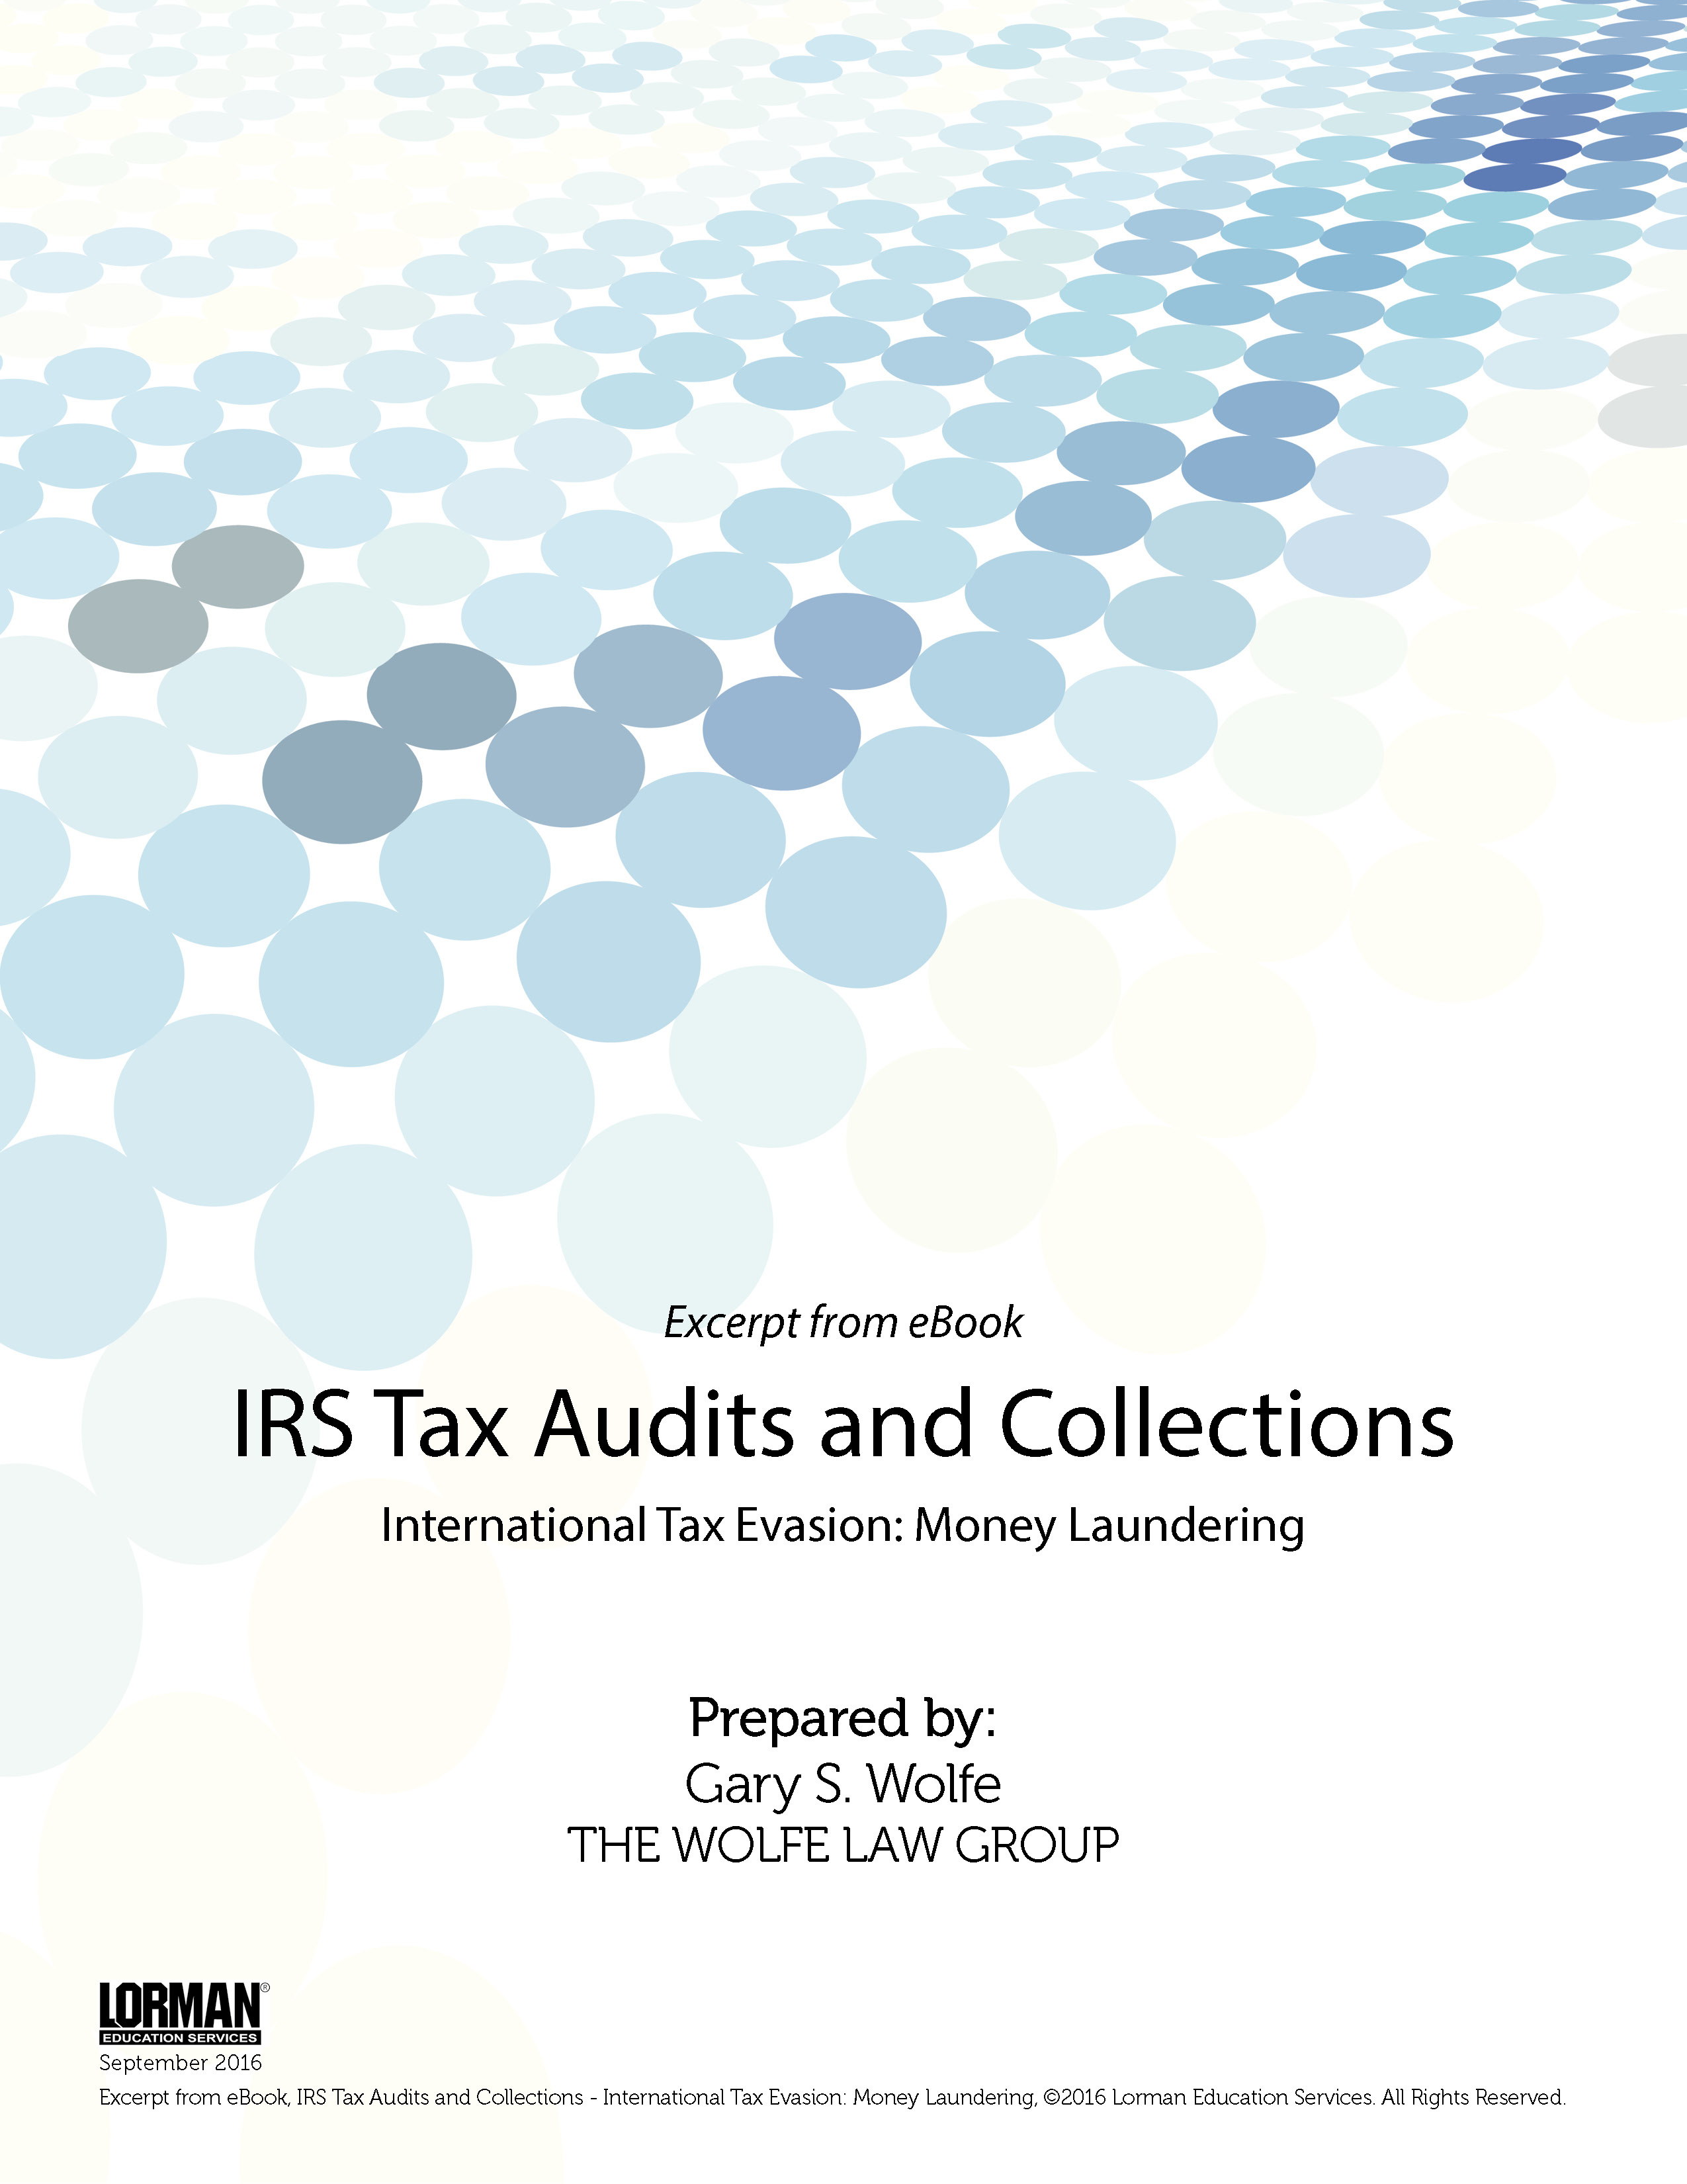 IRS Tax Audits and Collections: International Tax Evasion: Money Laundering